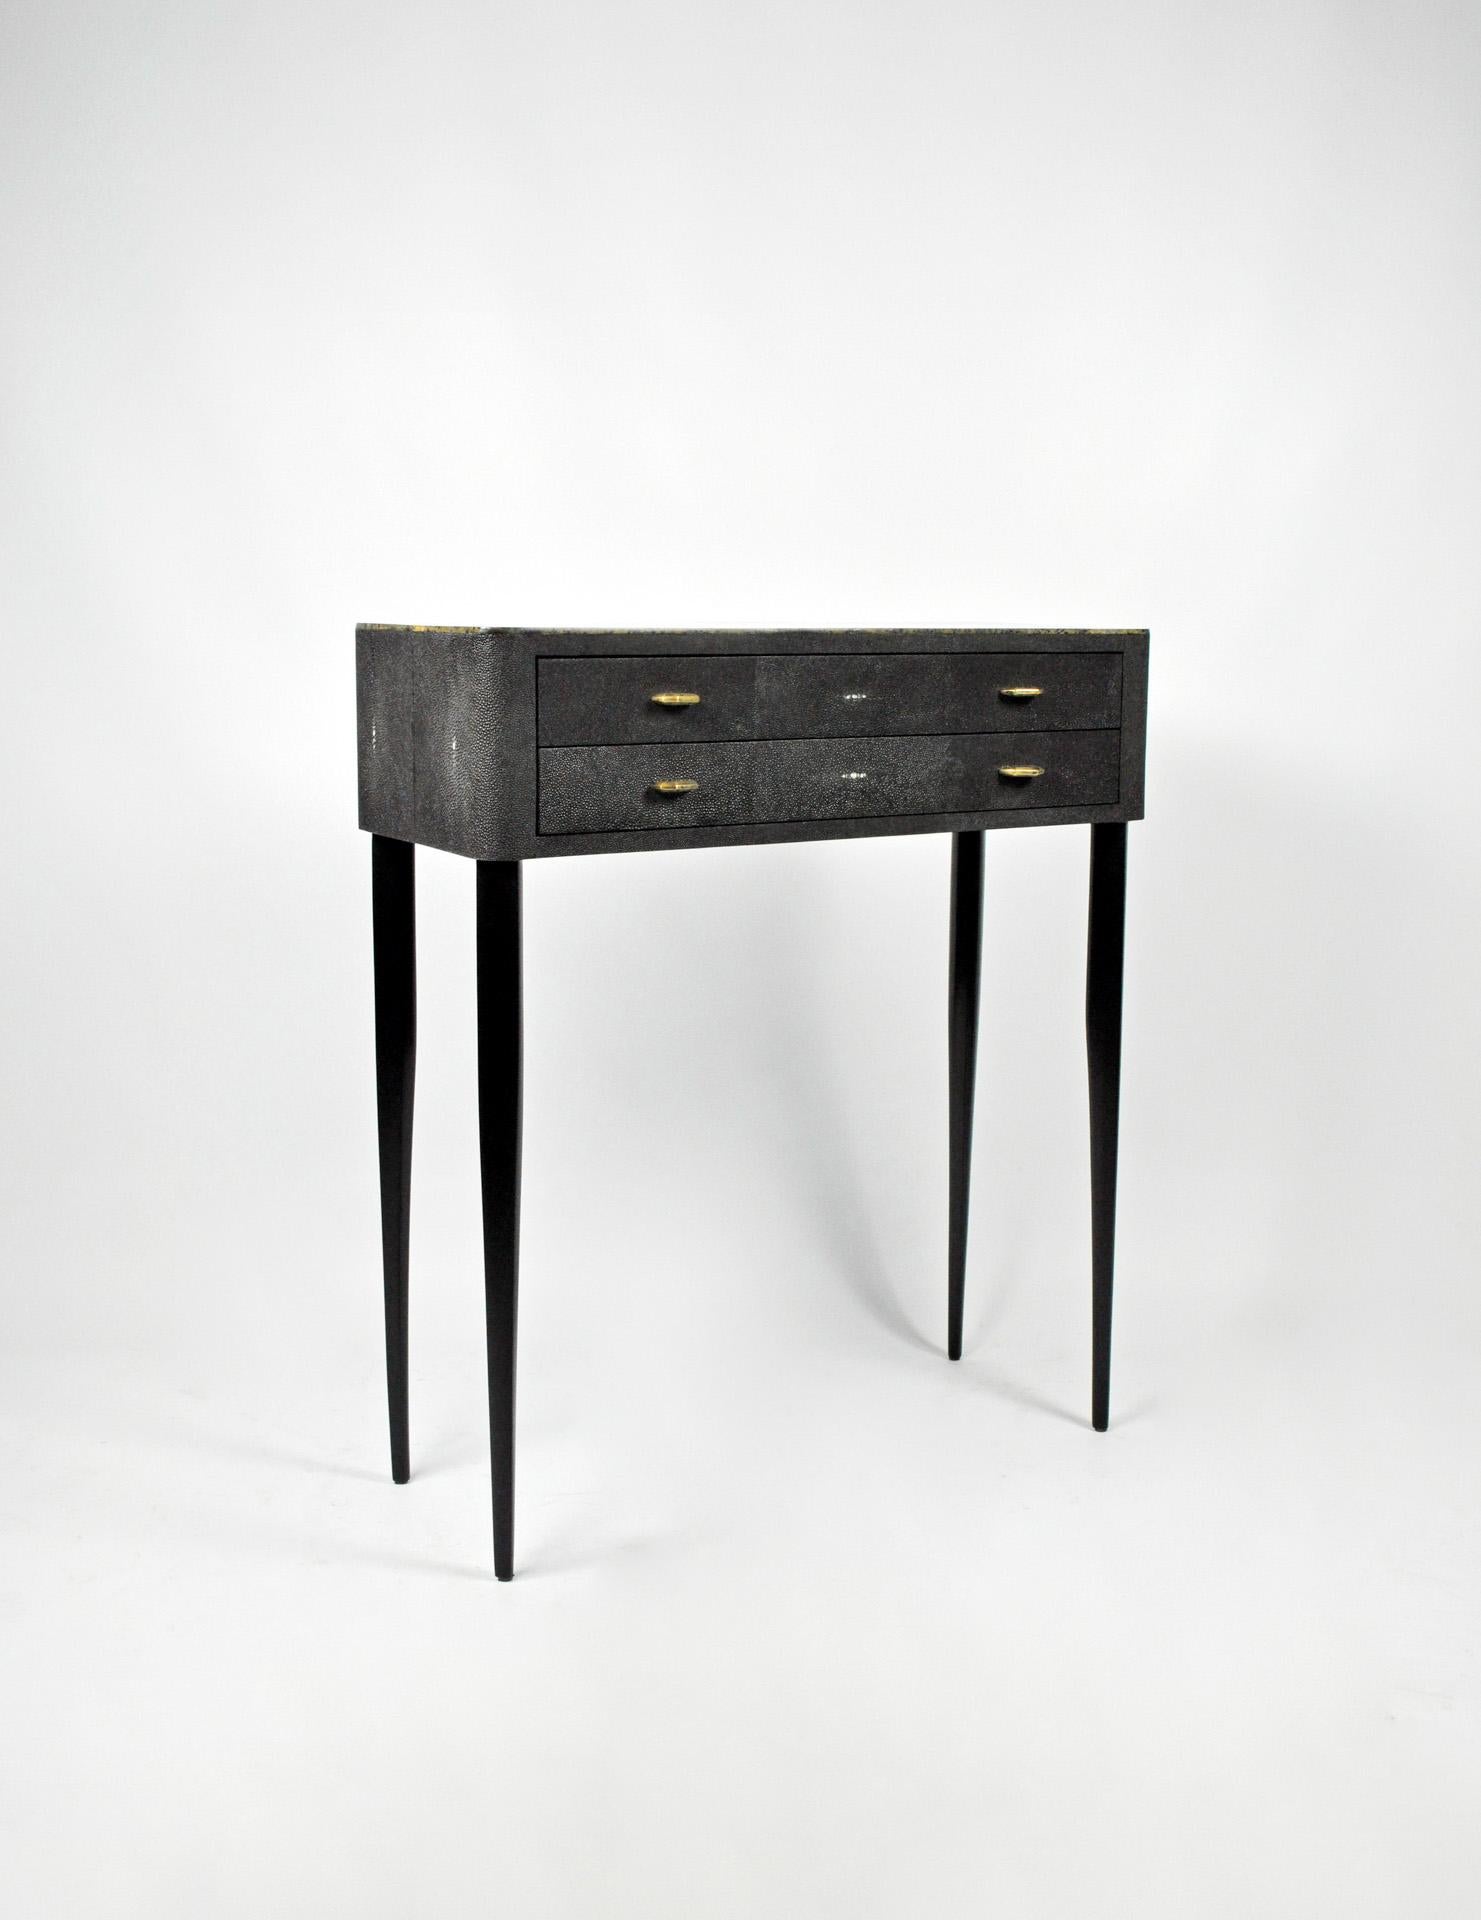 The console table has two drawers.
It is made of black shagreen and the top has a marquetry of brown 